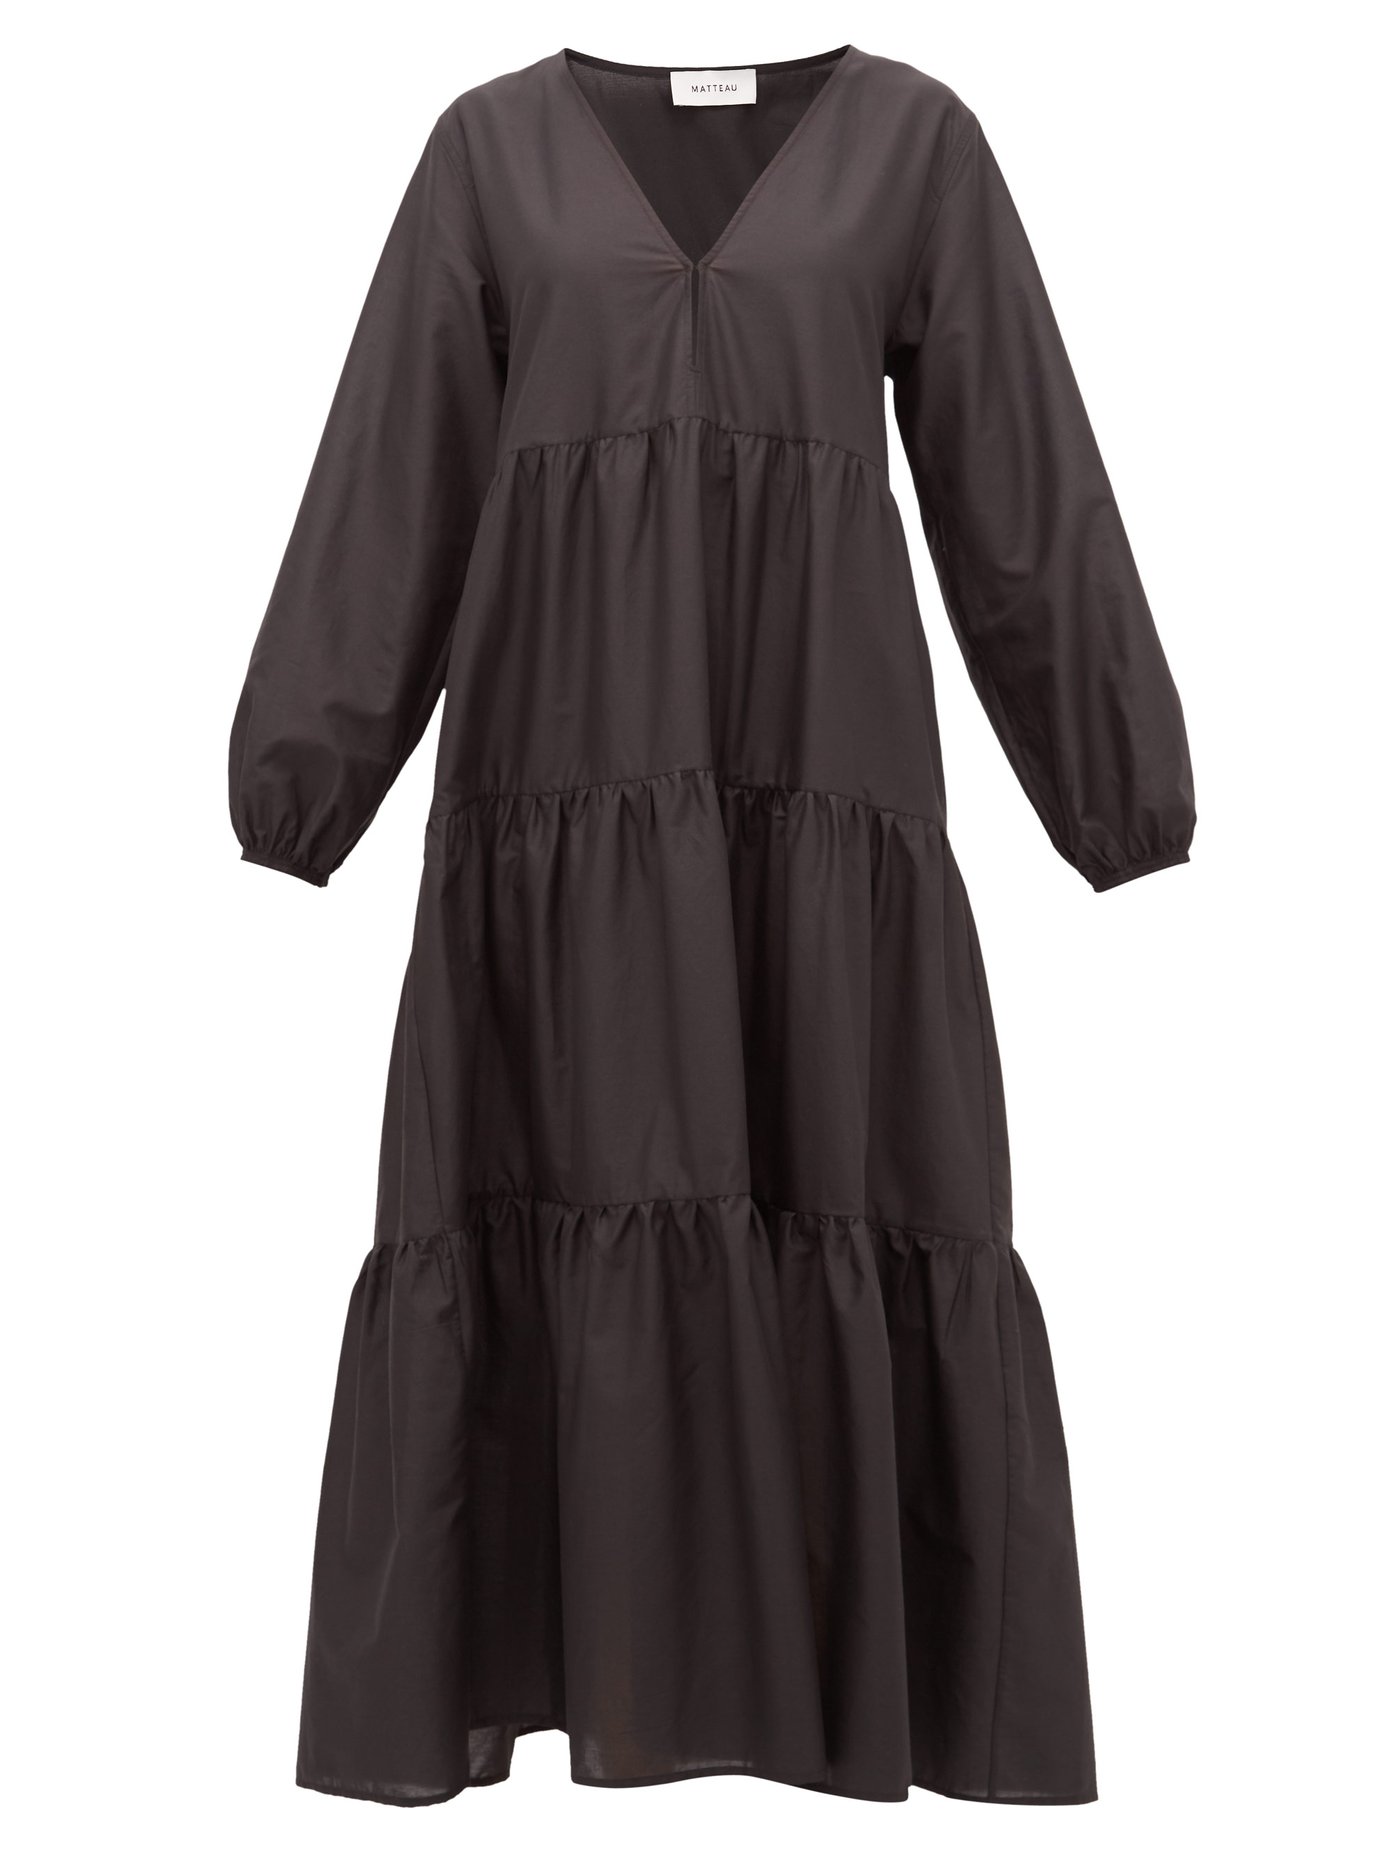 cotton black dress with sleeves